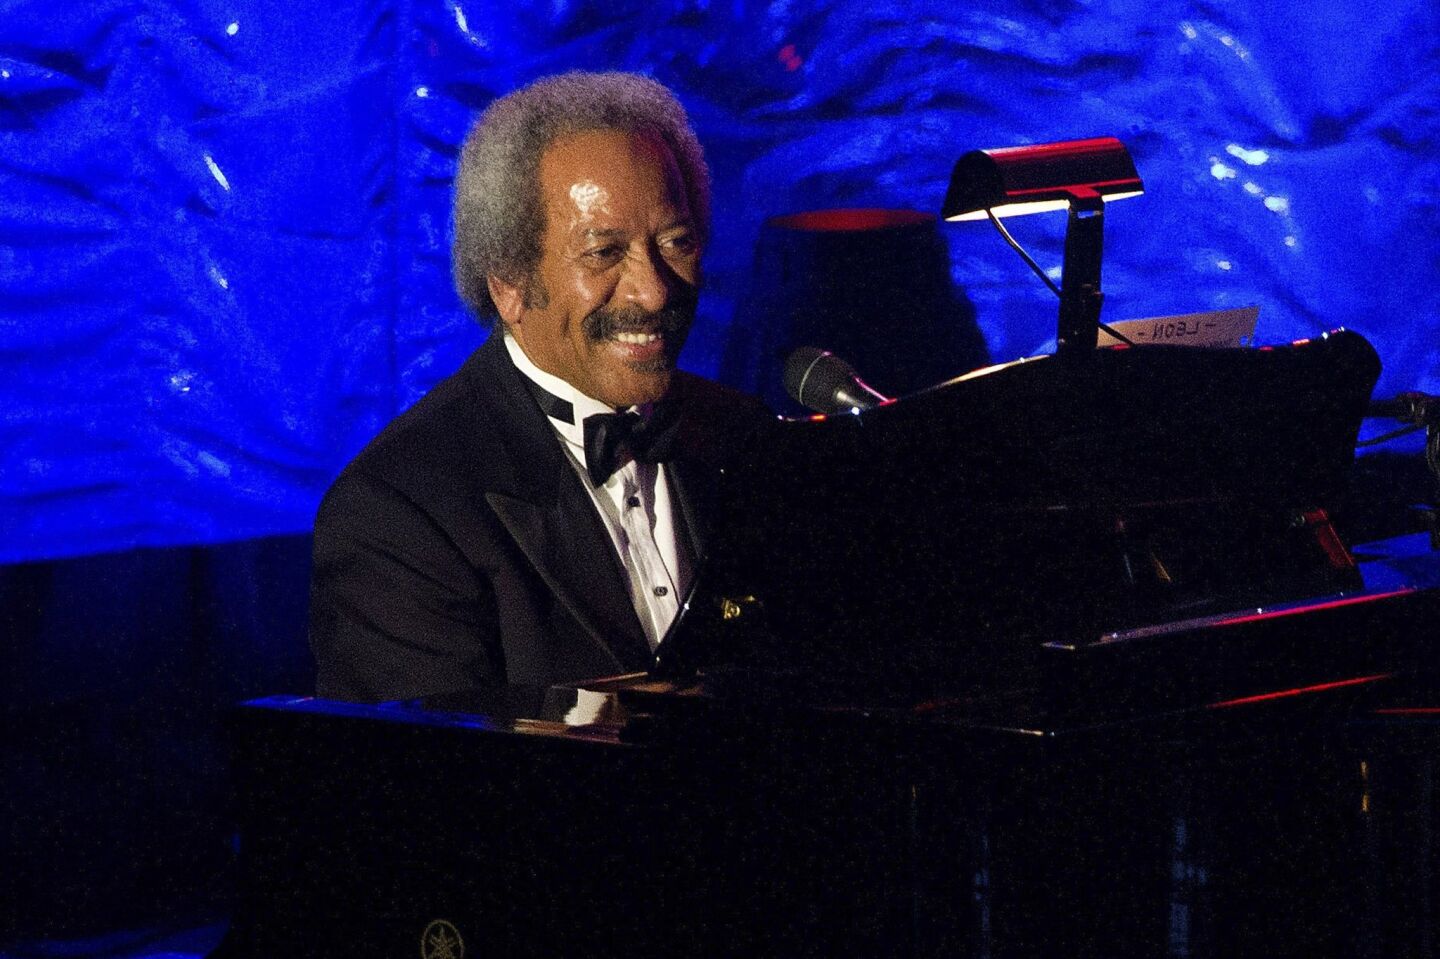 Allen Toussaint performs at the 42nd Songwriters Hall of Fame Awards in New York in 2011.